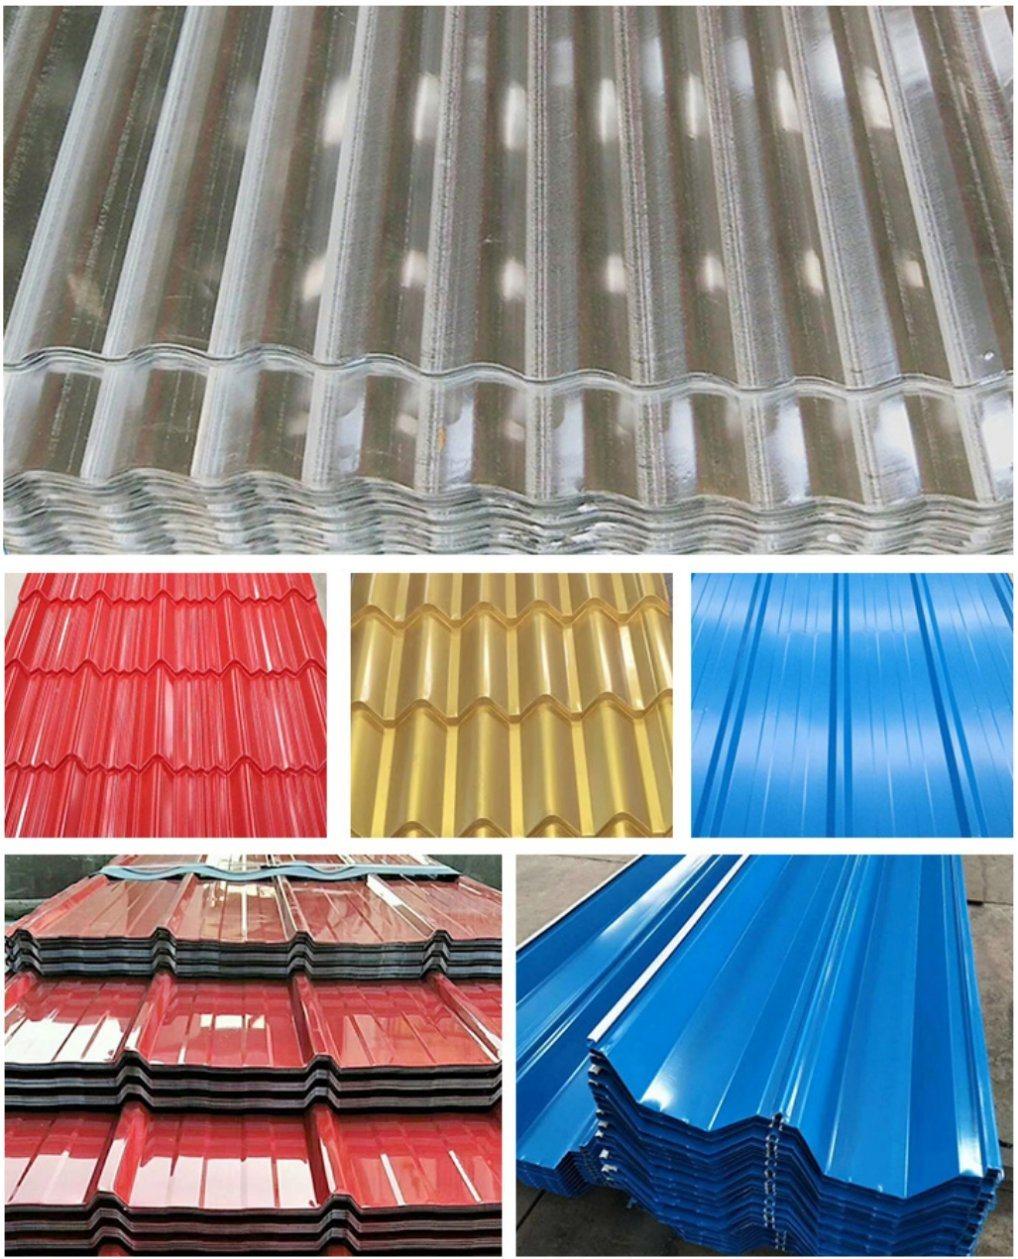 Galvanized Corrugated Steel Roofing Sheet Galvanized Roof Tile Zinc Roofing Tile in Zimbabwe